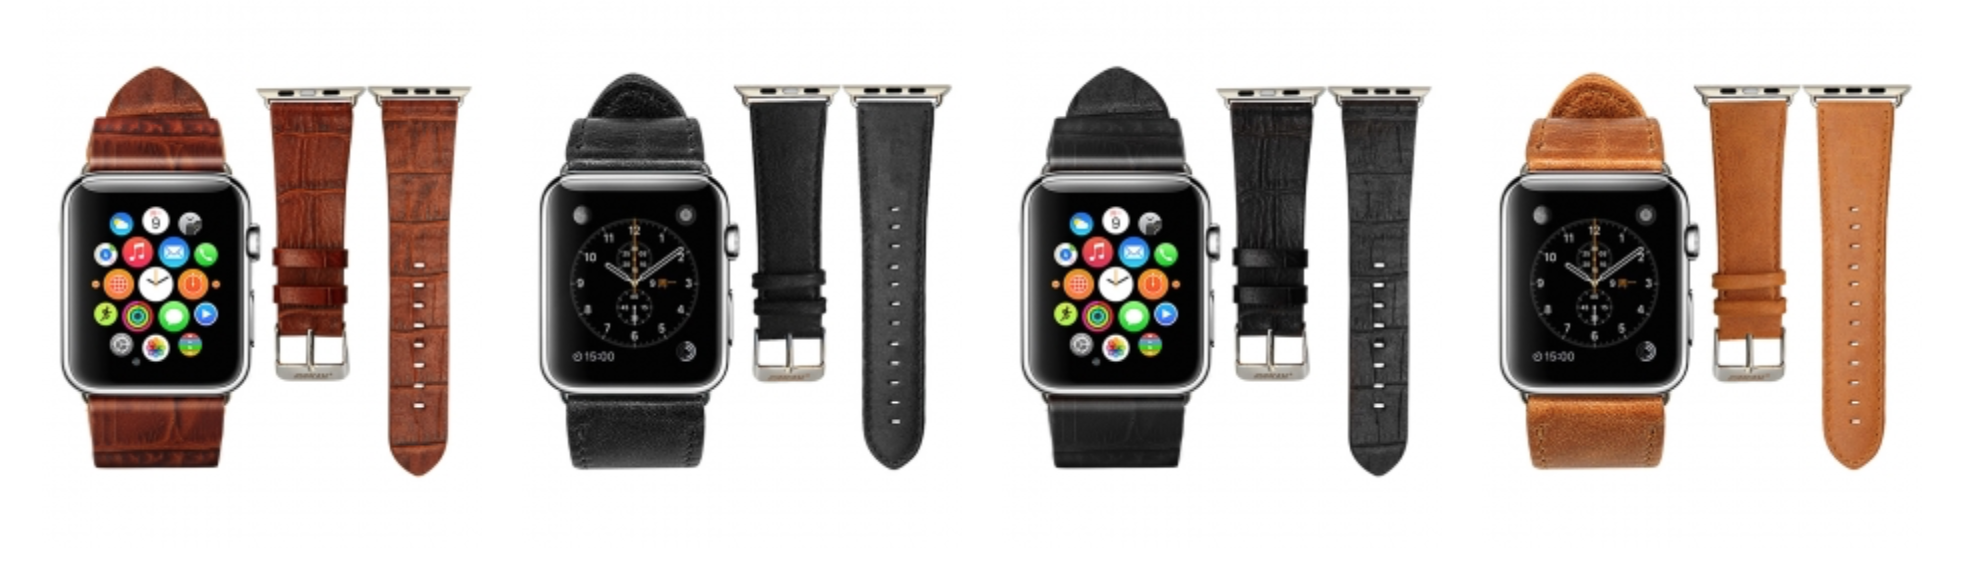 Jisoncase Leather Apple Watch Band Offers Quality for Less